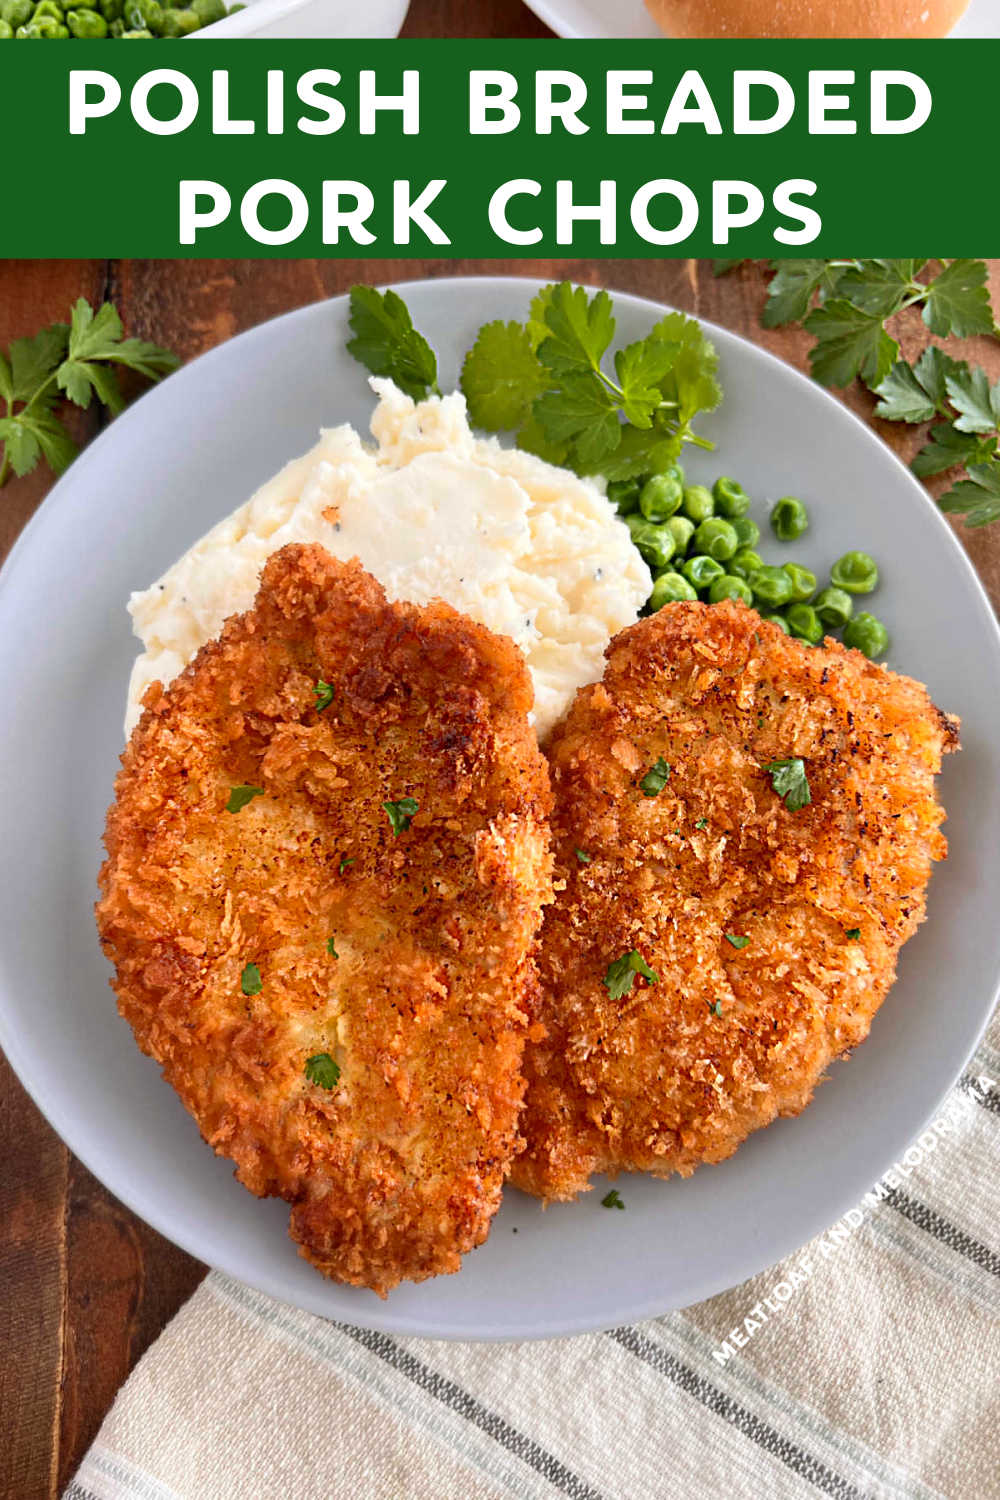 Grandma's Polish Breaded Pork Chops Recipe (Kotlet Schabowy) are pork cutlets pounded thin, then breaded and fried until crispy. Easy and Delicious! These boneless pork chops are quick enough for a weeknight meal and special enough for Sunday Dinner! via @meamel